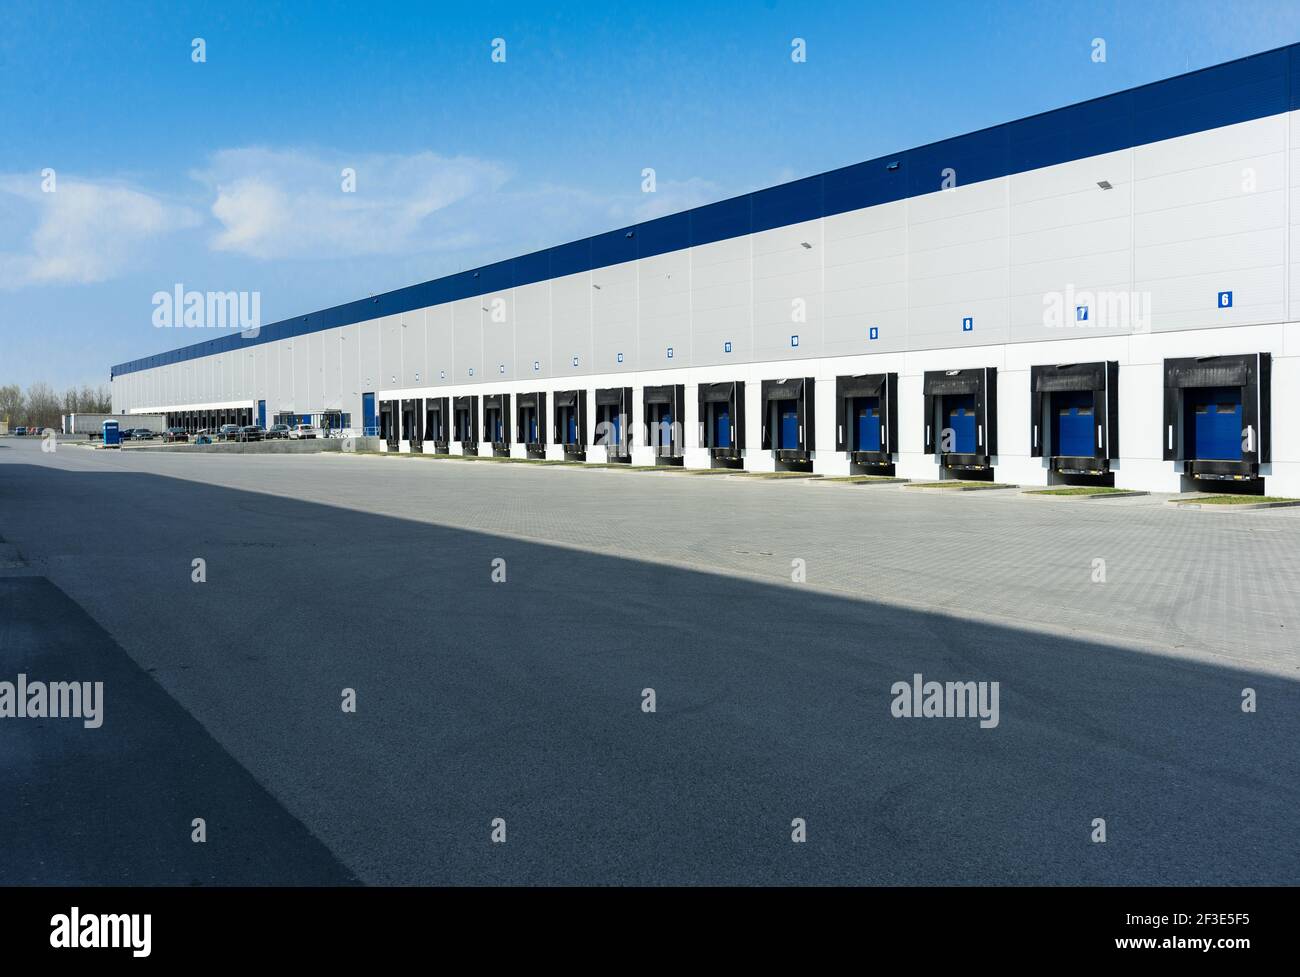 Wide view of loading bays on wall of large logistic hall. Long row of docks illuminated by sun. Transport and logistics concept. Stock Photo